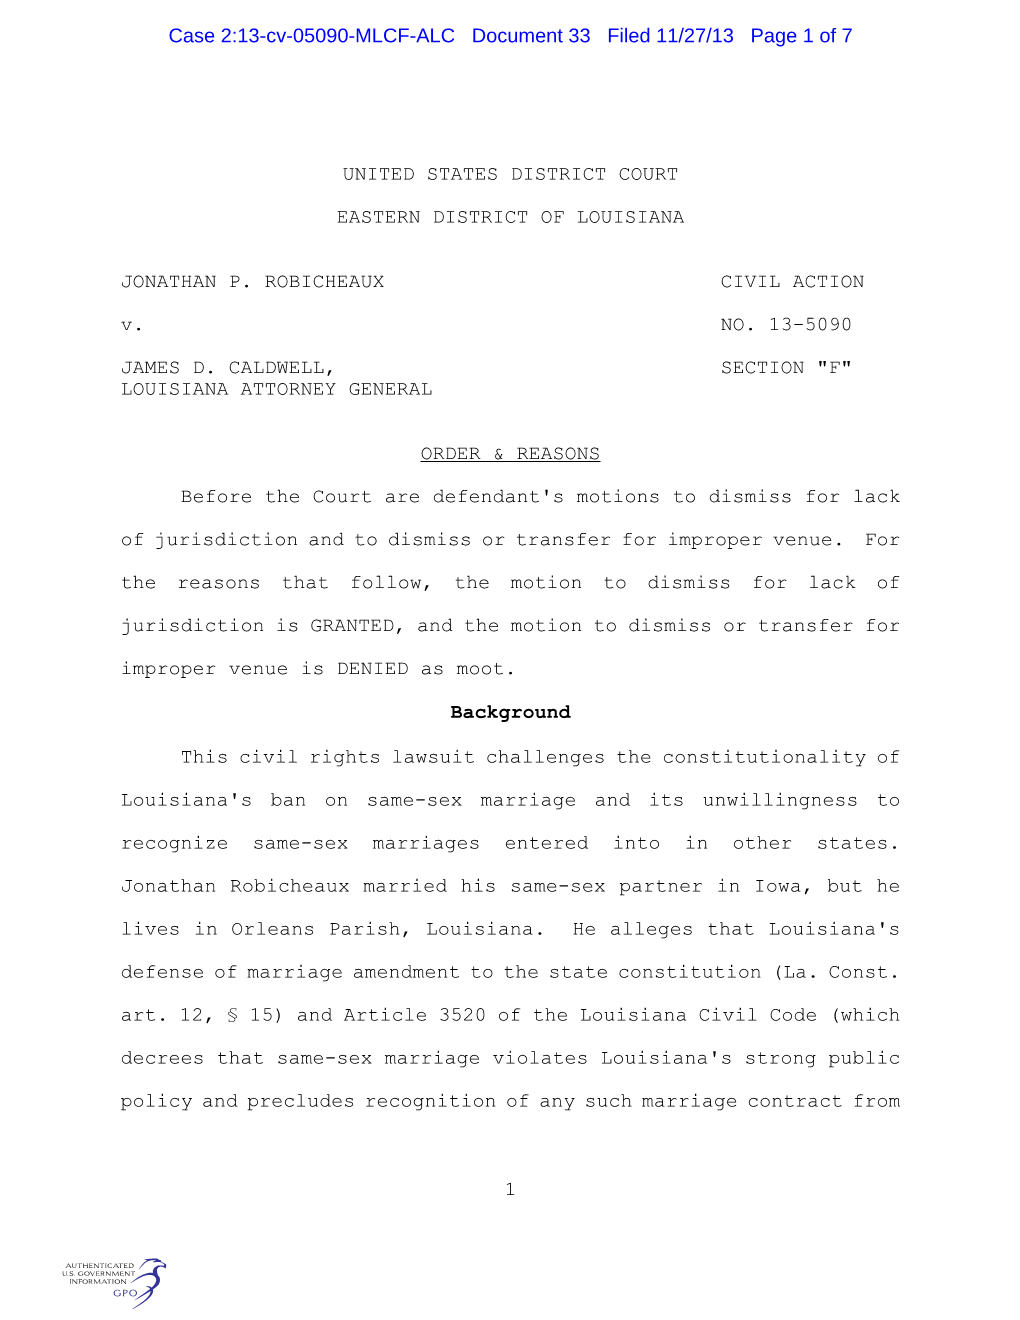 UNITED STATES DISTRICT COURT EASTERN DISTRICT of LOUISIANA JONATHAN P. ROBICHEAUX CIVIL ACTION V. NO. 13-5090 JAMES D. CALDWELL